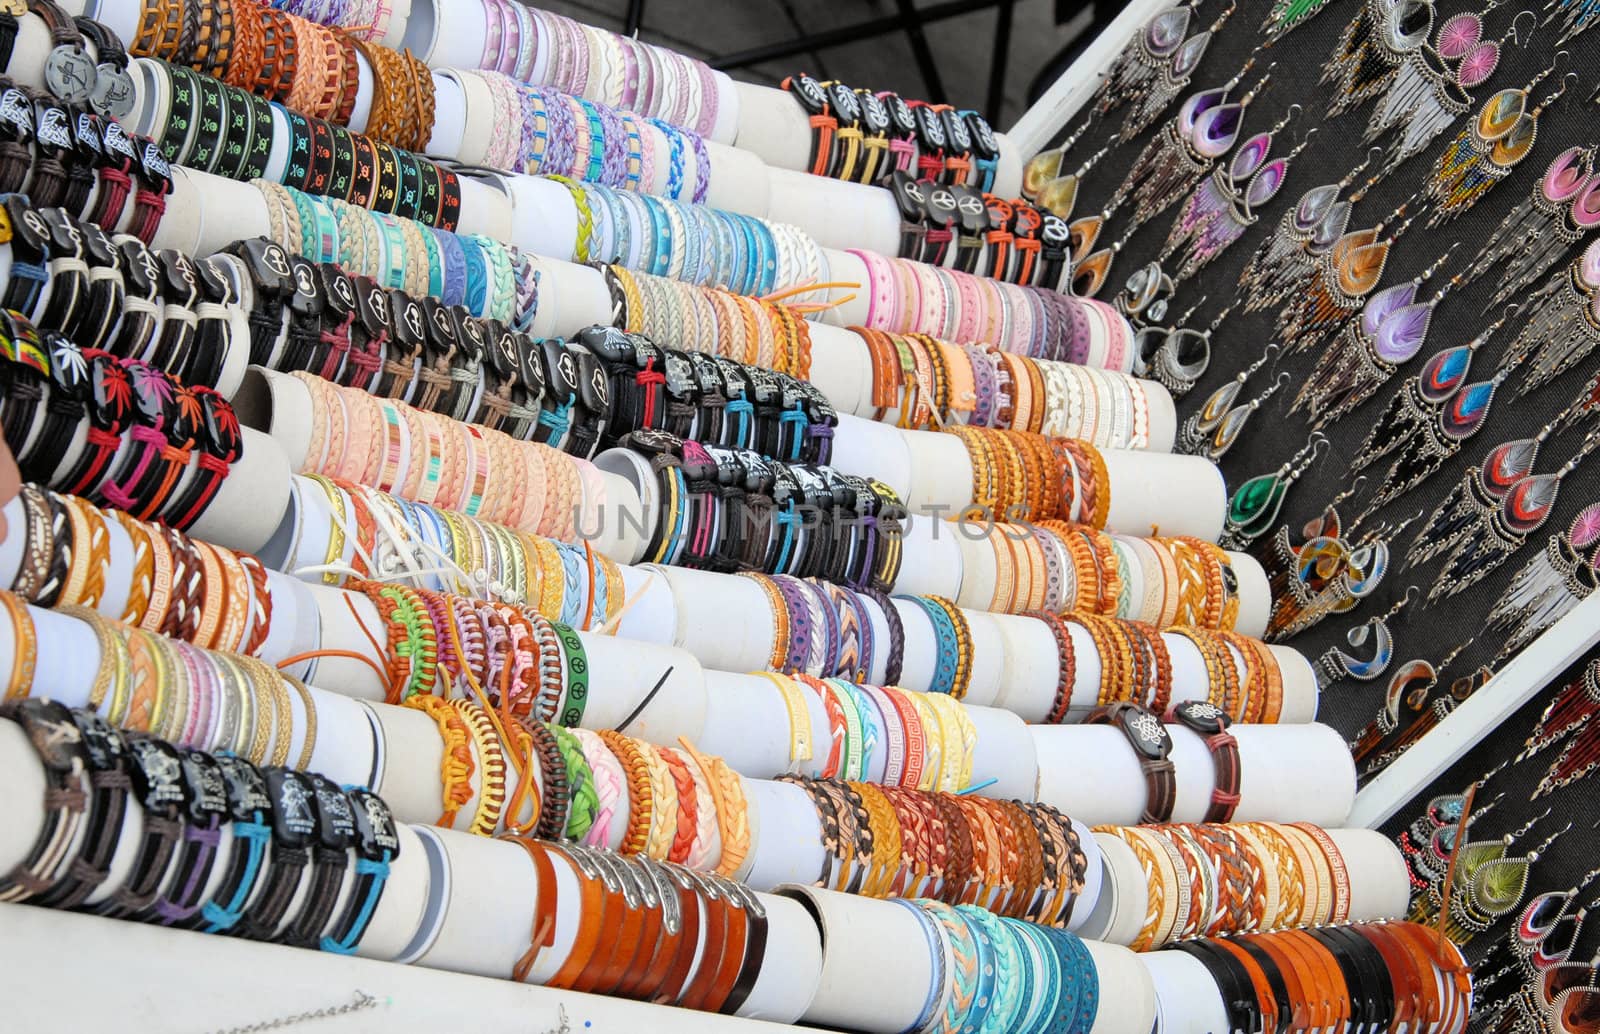 Ear rings and bracelets for sale at a street fair